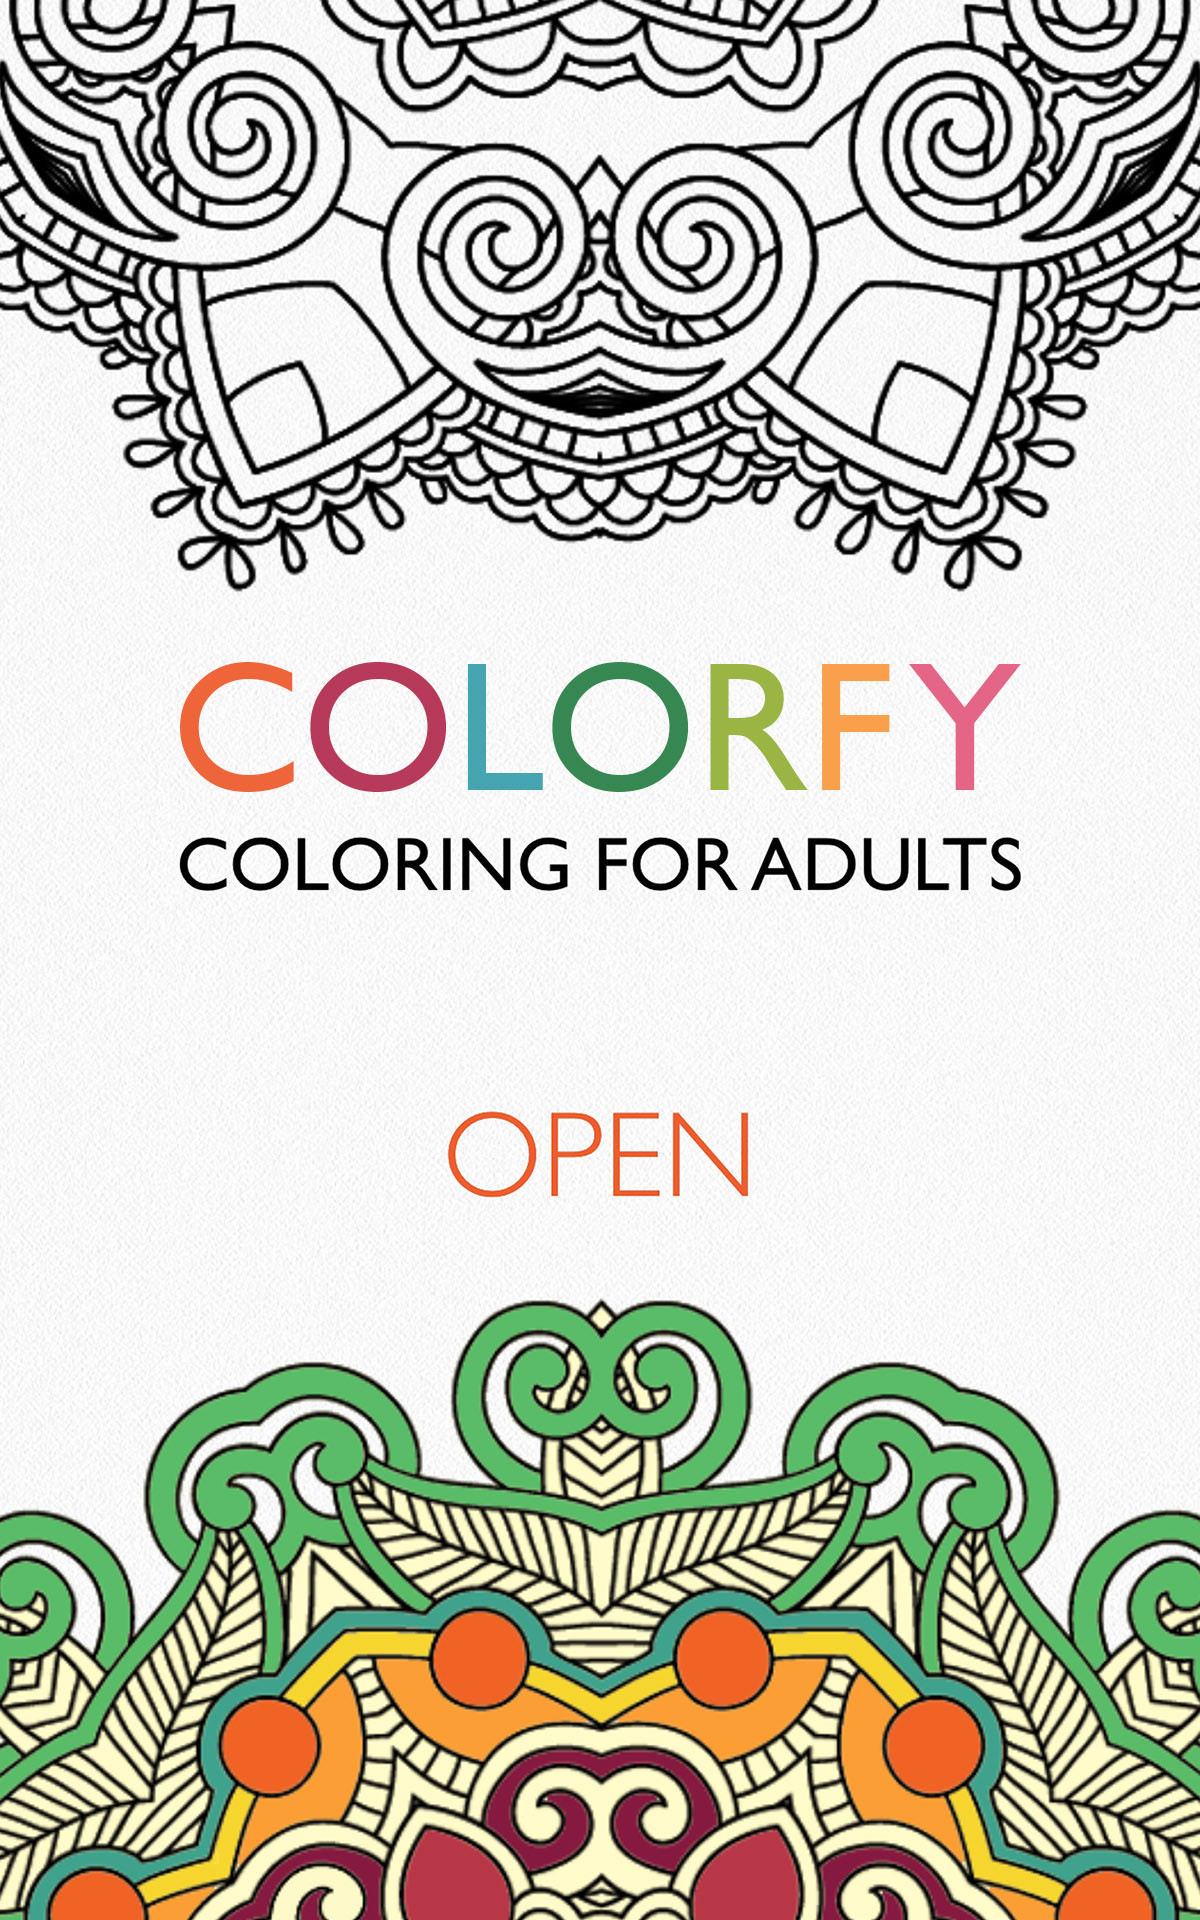 Coloring Book App For Adults Android
 Amazon Colorfy Coloring Book for Adults Free